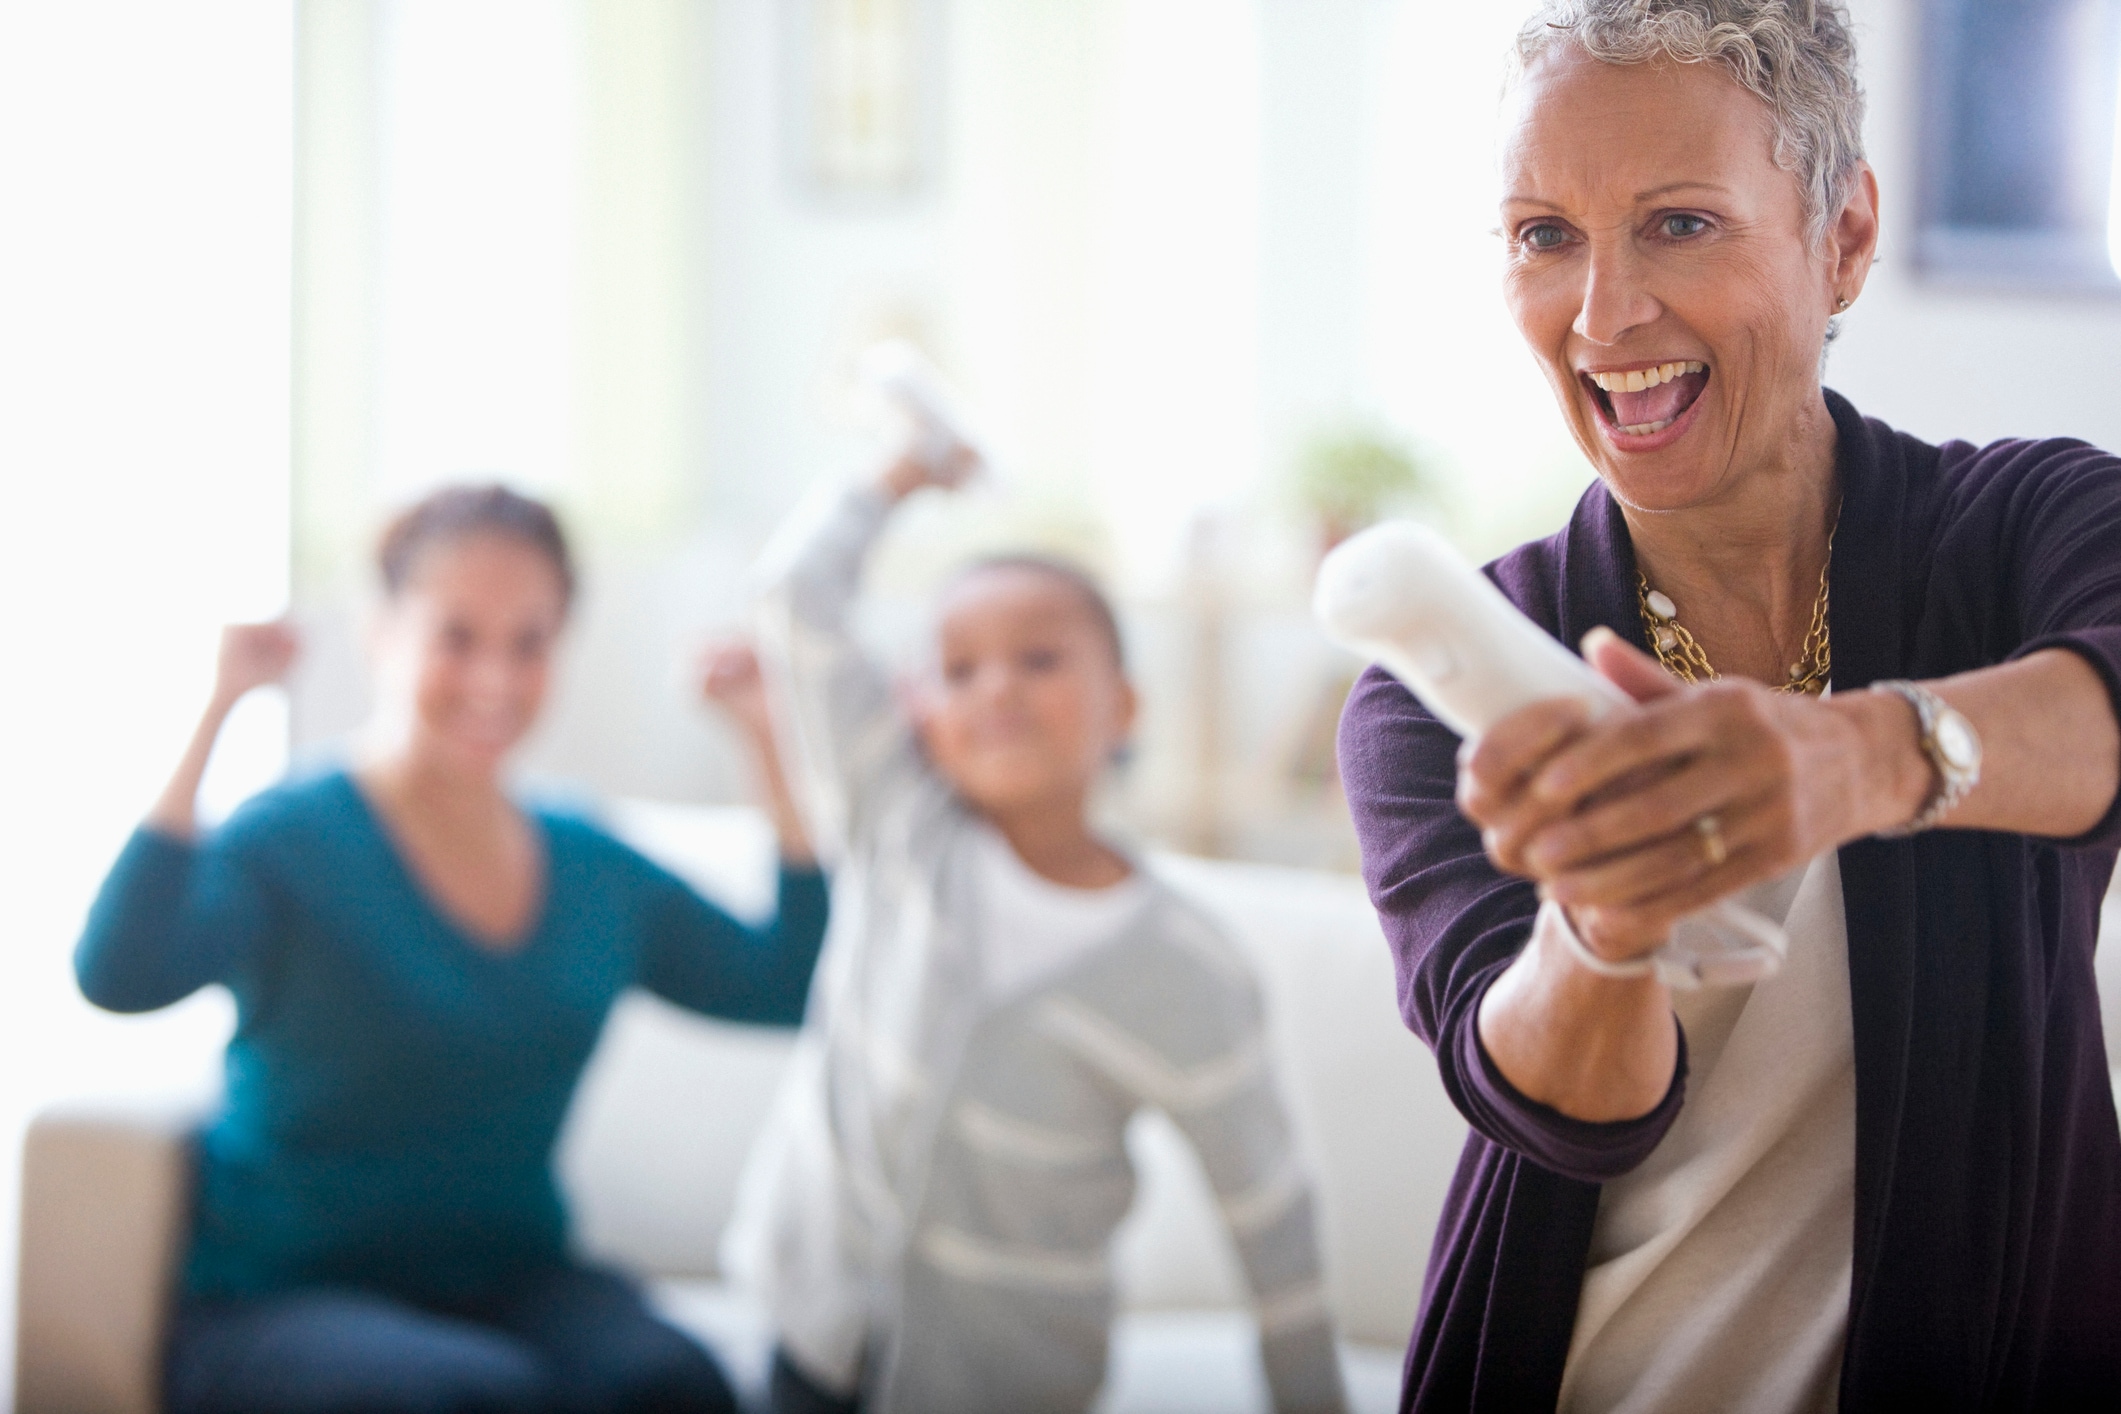 Games for seniors: The best brain and body-stimulating apps and activities